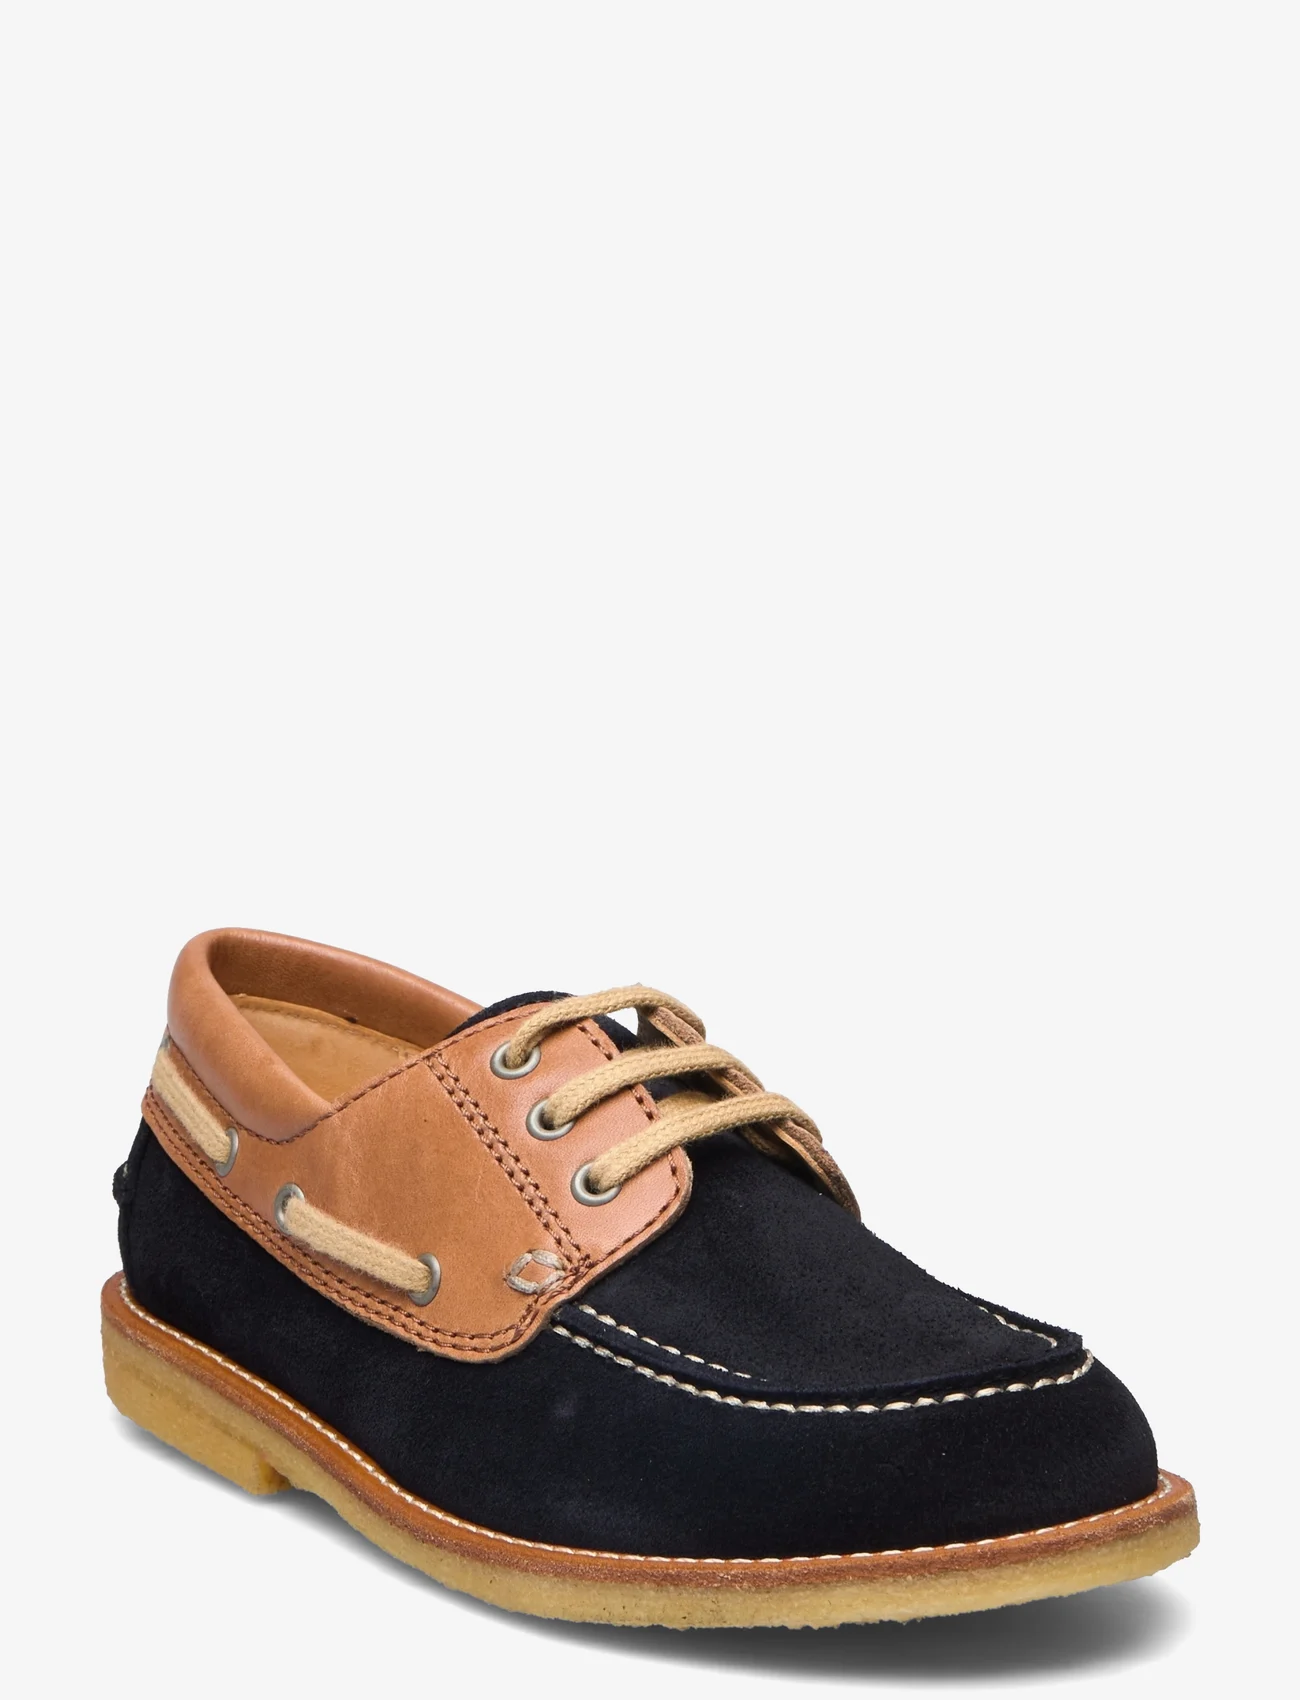 ANGULUS - Shoes - flat - with lace - kinder - 2215/1789 navy/cognac - 0